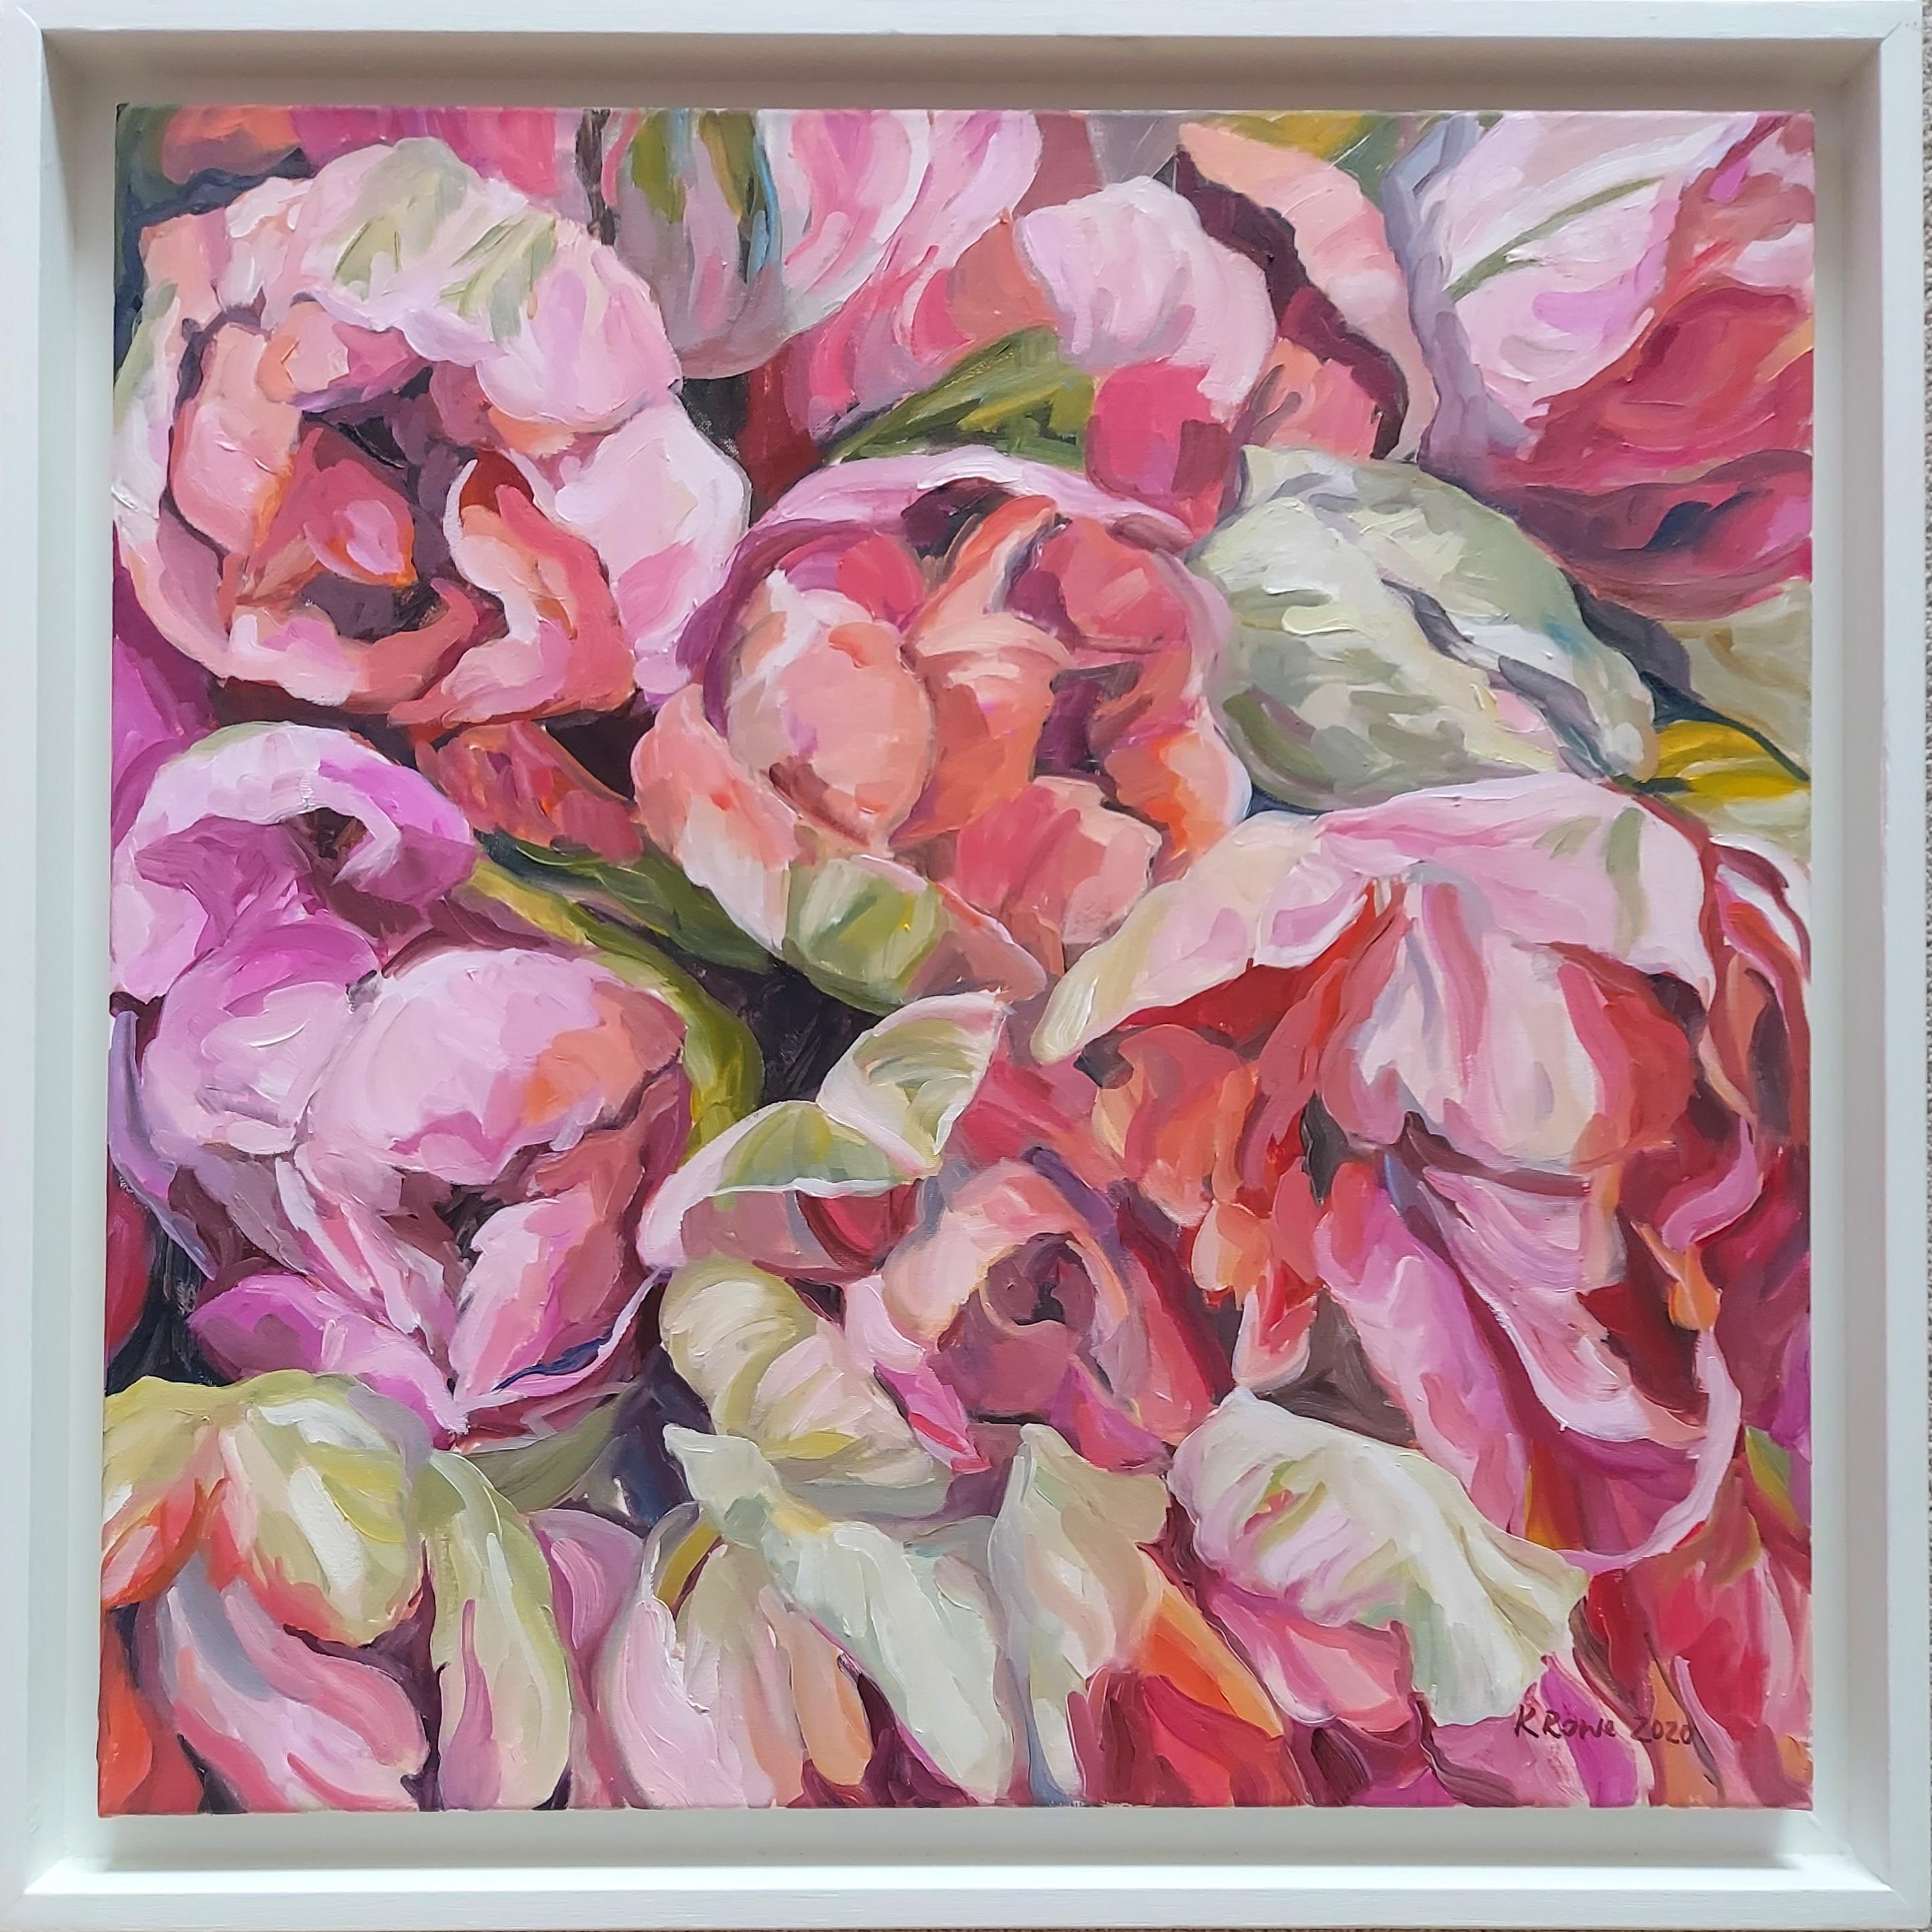  Pink and Orange Parrot Tulips - Painting by Katharine Rowe